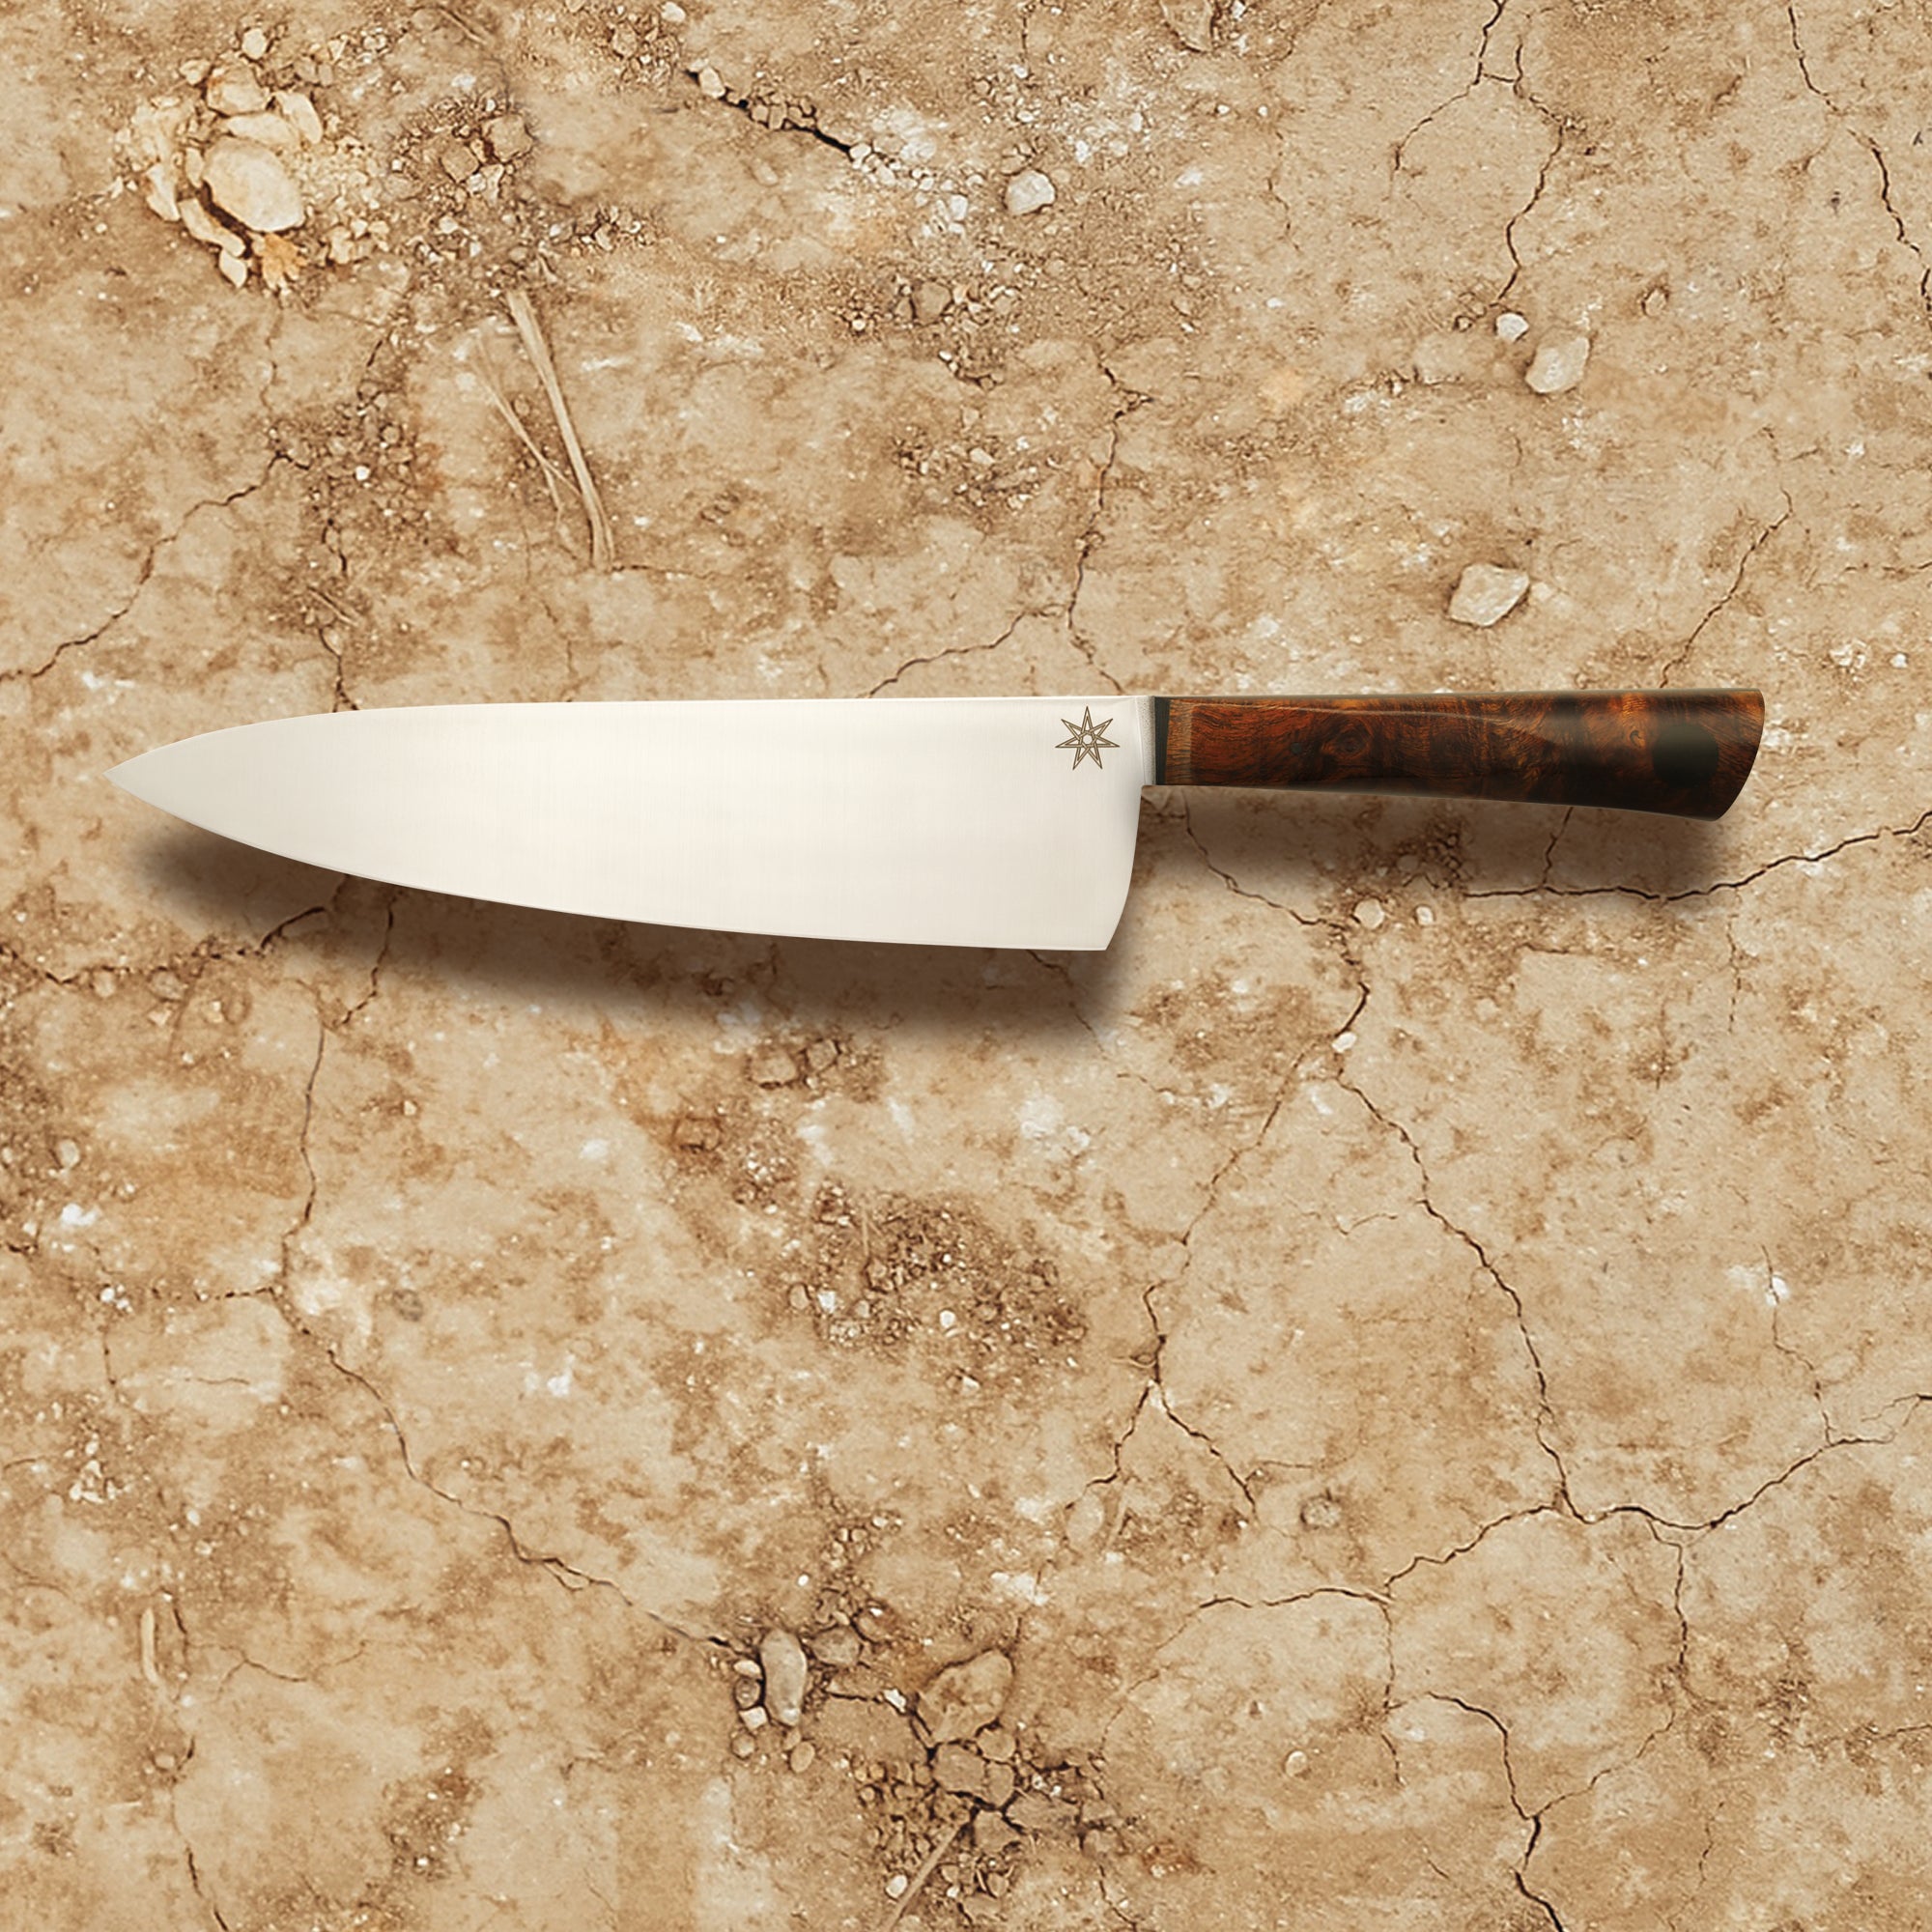 Town Cutler's best-selling chef knife size. 8.5" chef knife with stainless steel blade and lux desert ironwood handle. Kitchen knife handmade in Reno, NV USA